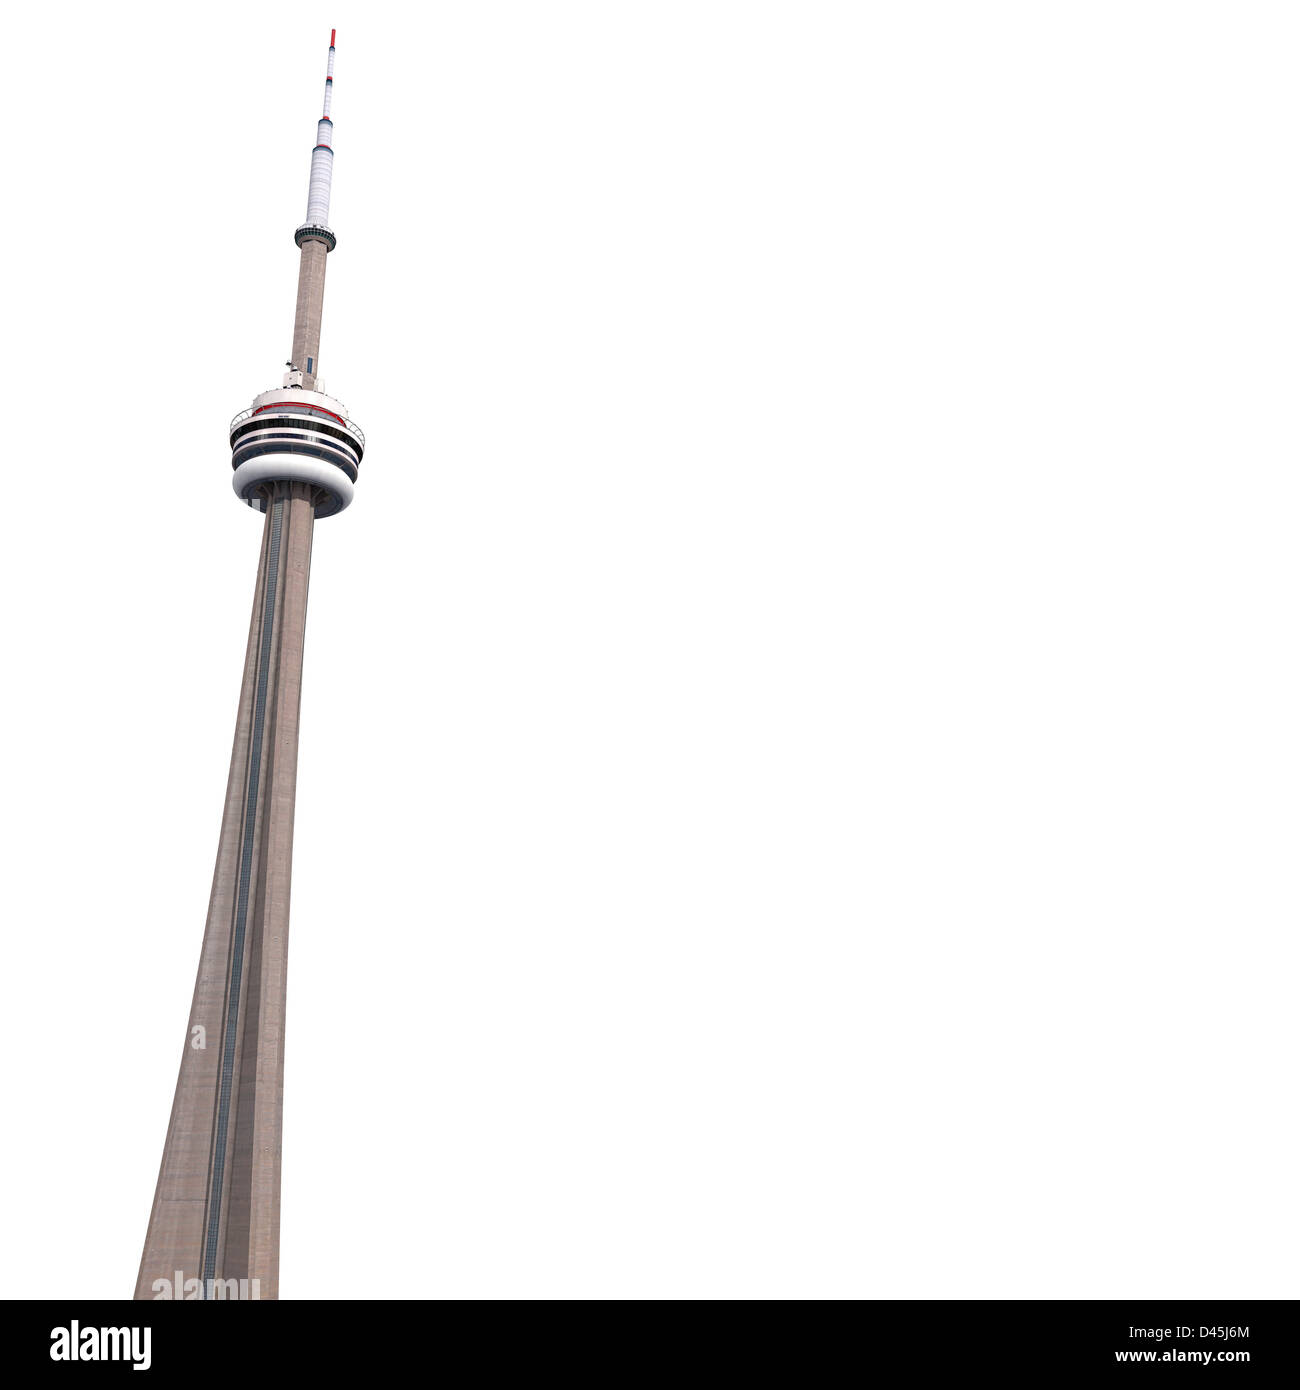 Toronto CN Tower isolated on white background with copy space. Photorealistic 3D illustration. Stock Photo